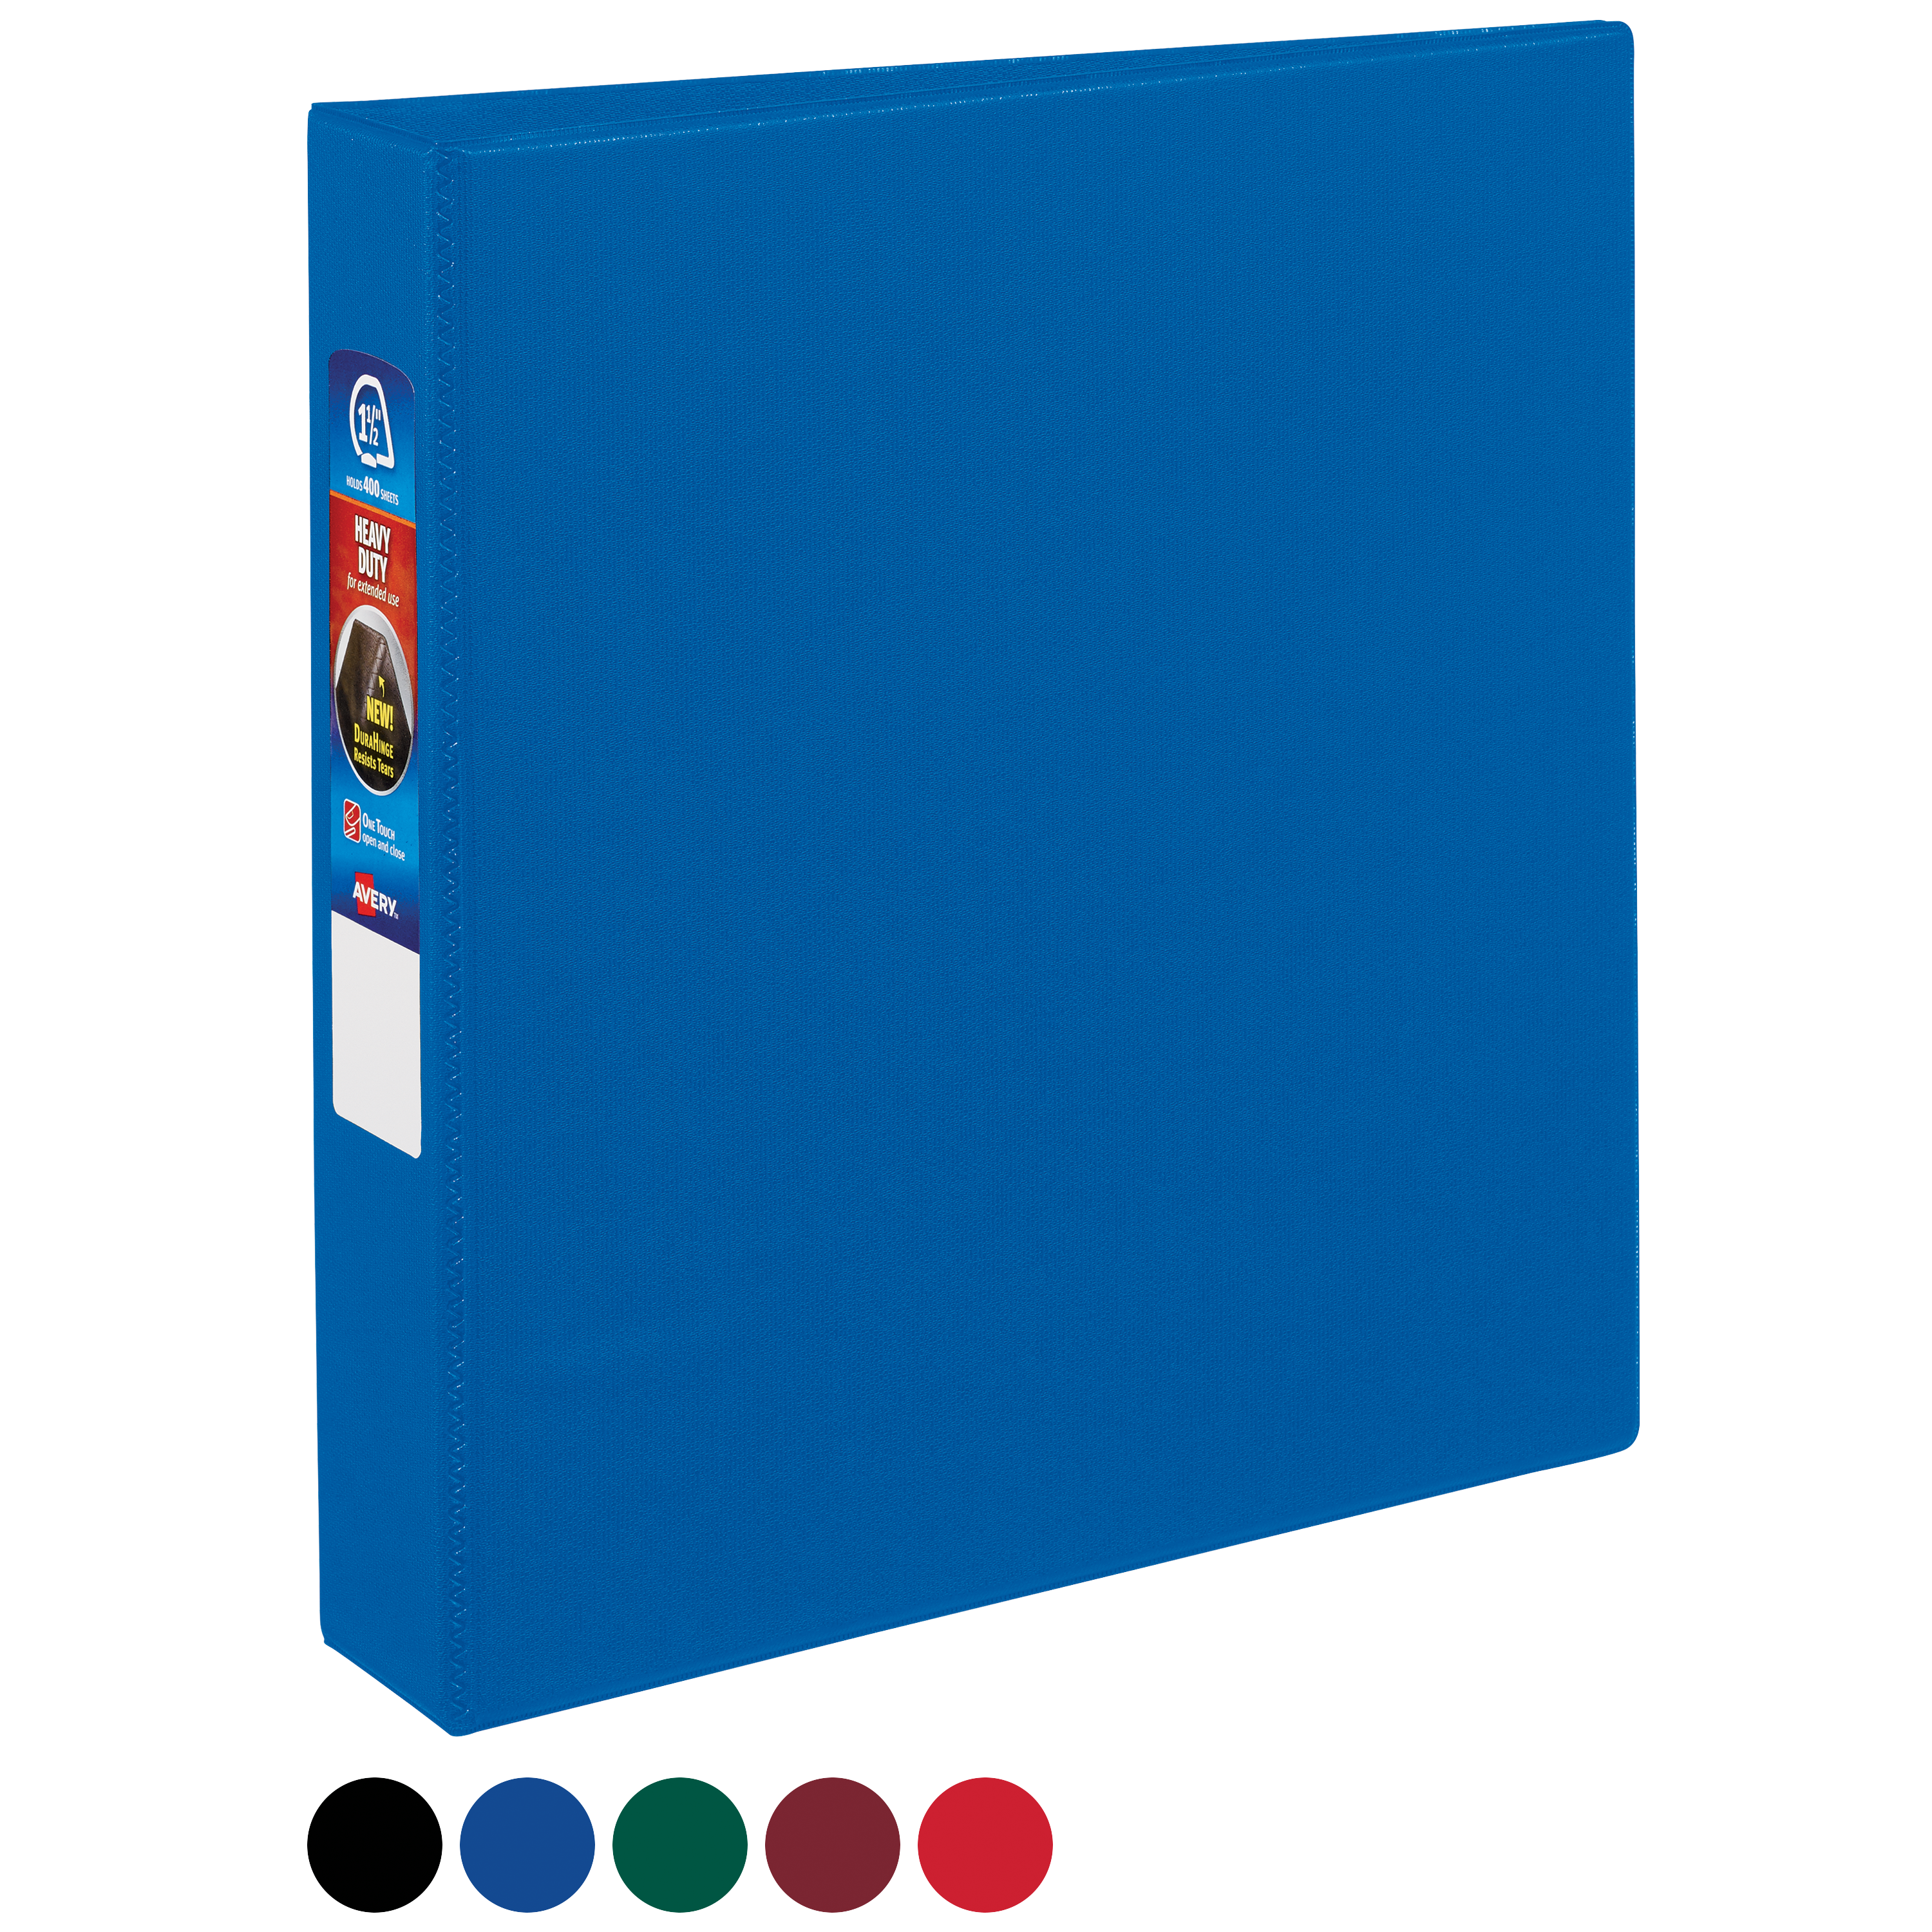 Green 79789 1 Binder Avery Heavy-Duty Binder with 1 Inch One Touch EZD Ring 